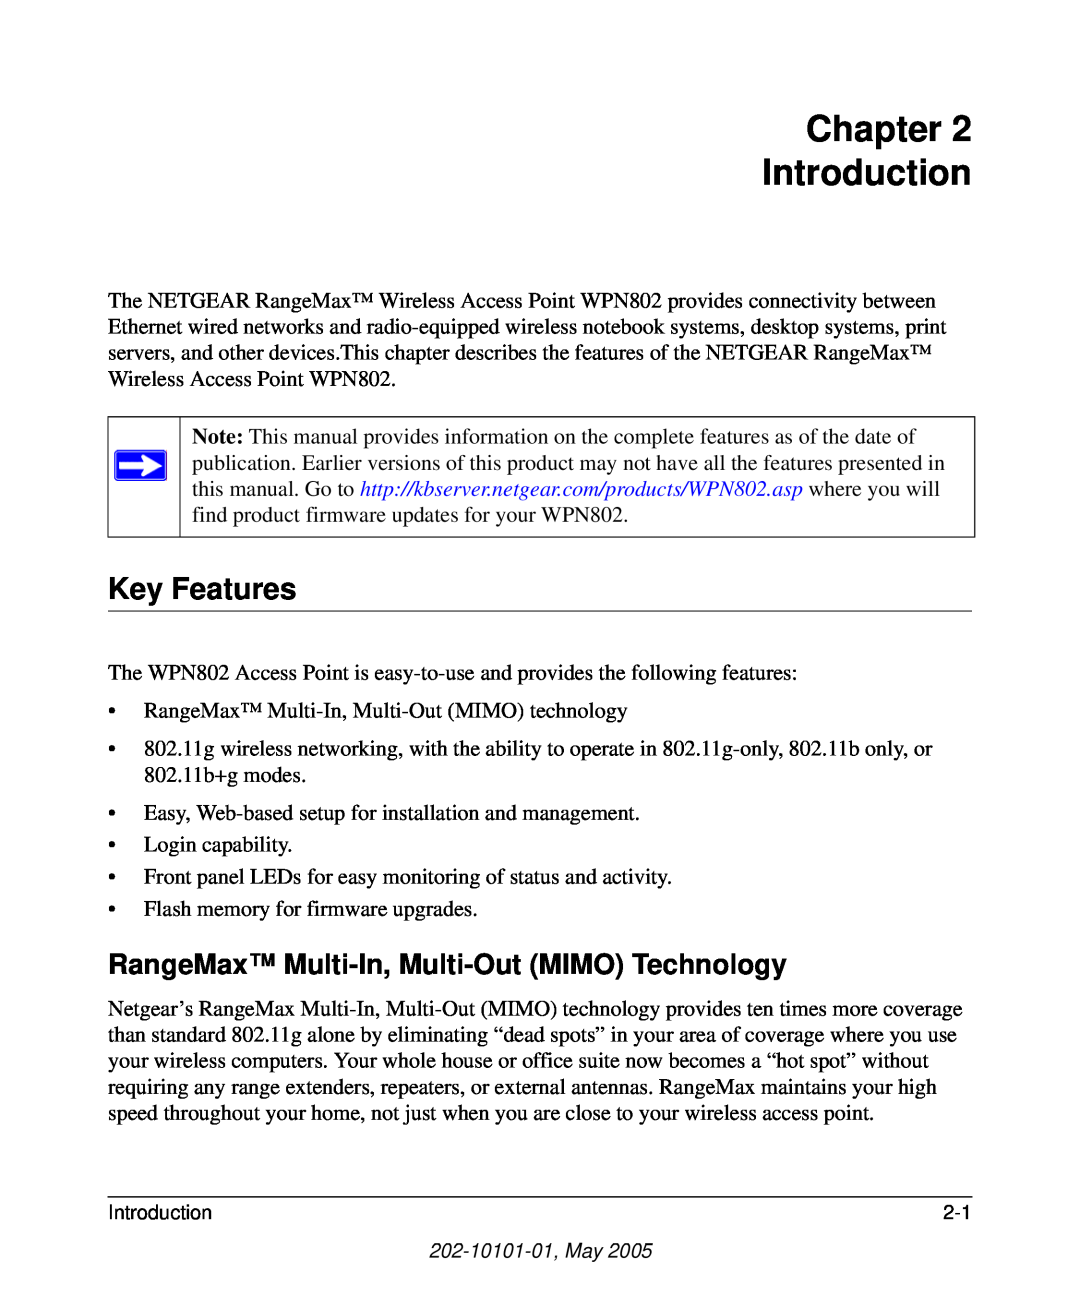 NETGEAR WPN802 manual Chapter Introduction, Key Features, RangeMax Multi-In, Multi-Out MIMO Technology 